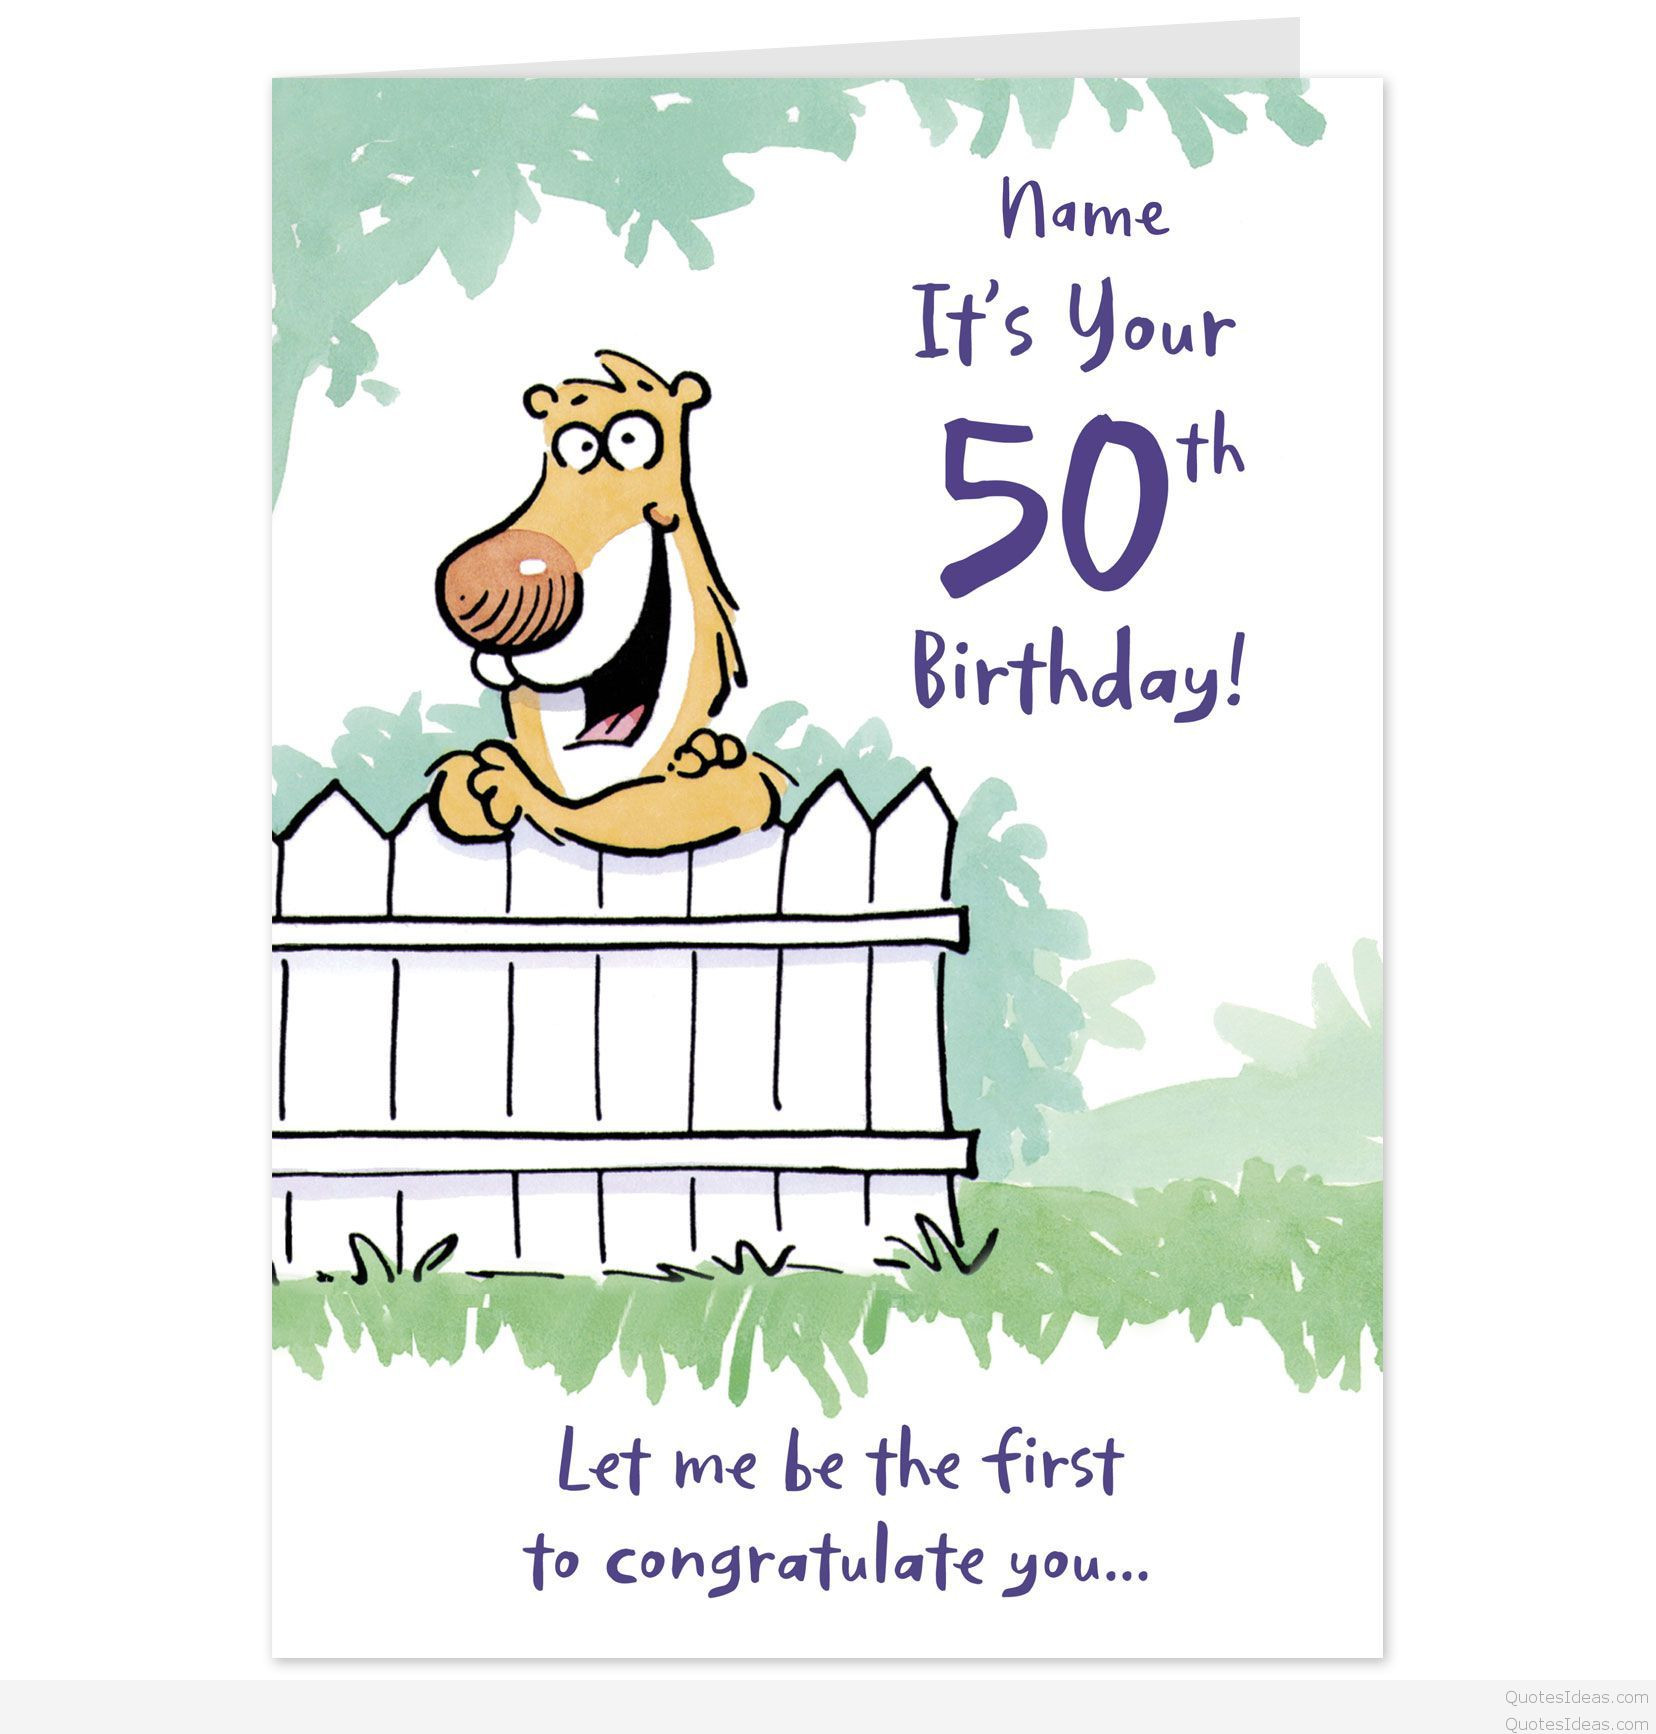 Funny Sayings For Birthday Cards
 Latest funny cards quotes and sayings